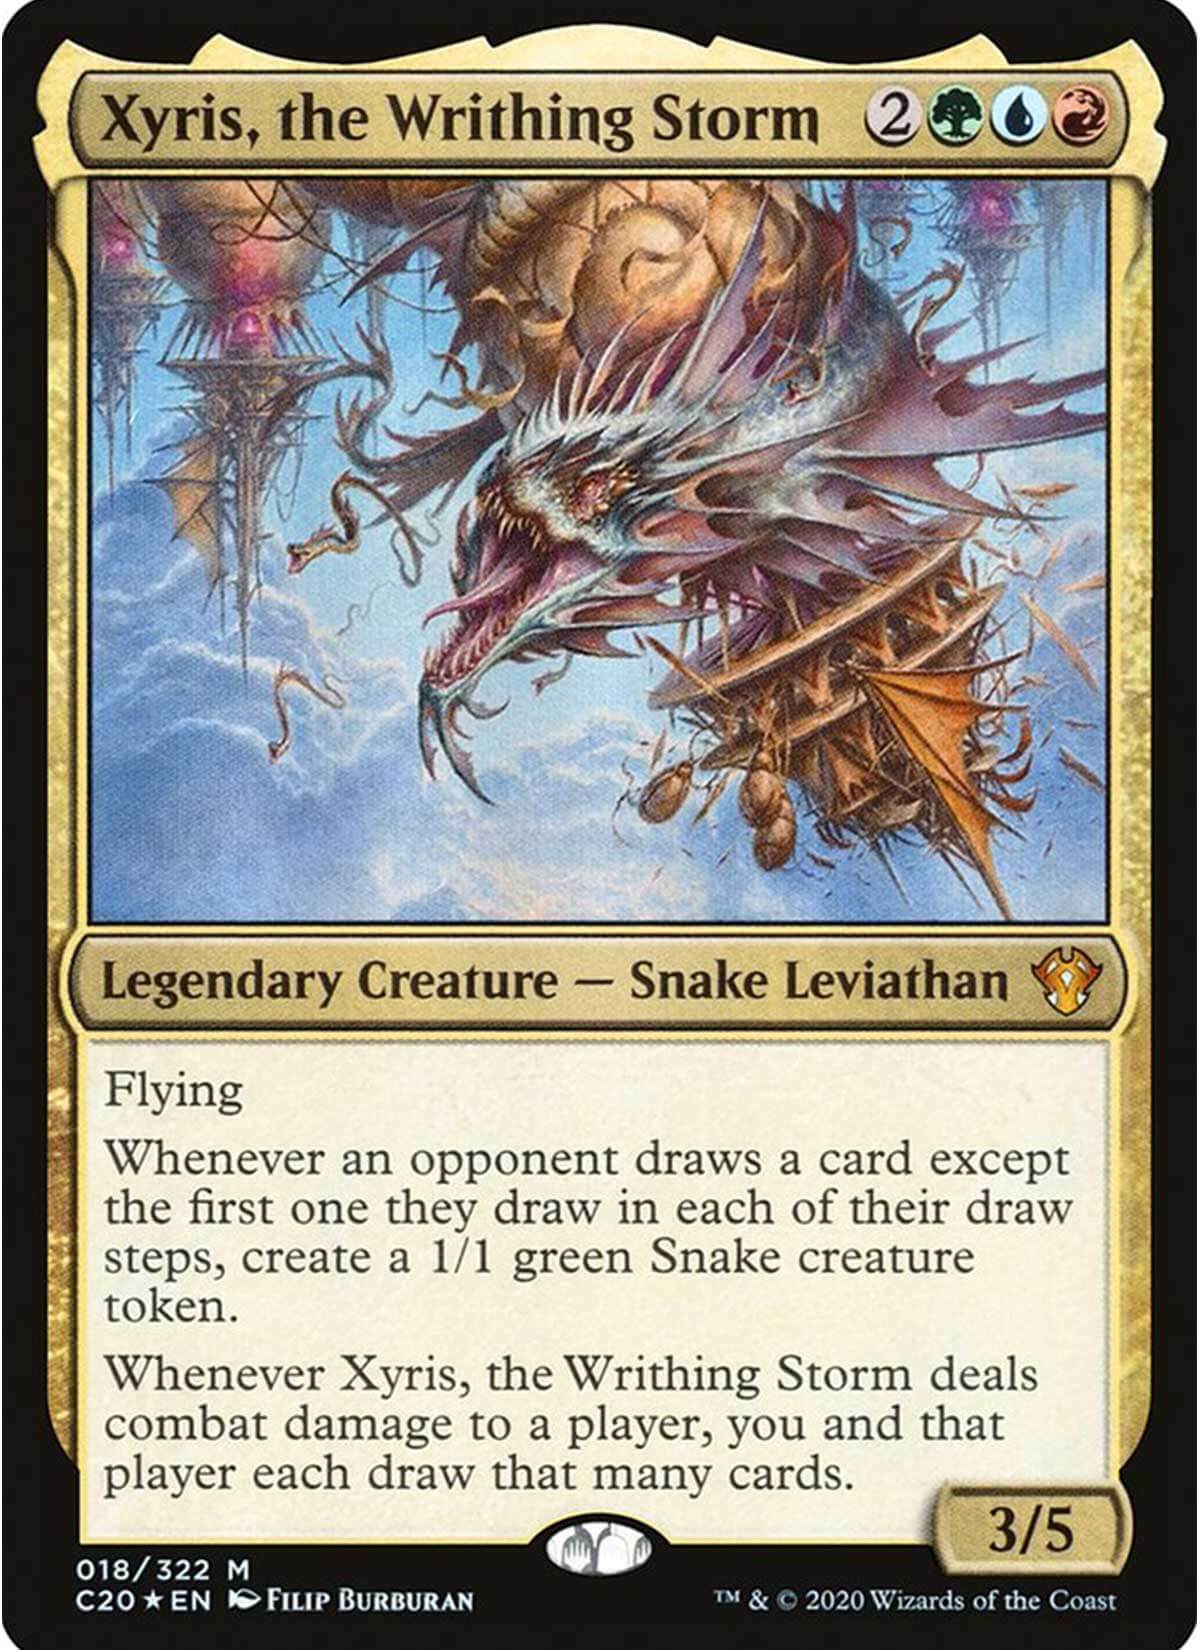  The Gathering card named “Xyris, the Writhing Storm,” depicting a large snake taking down airships.